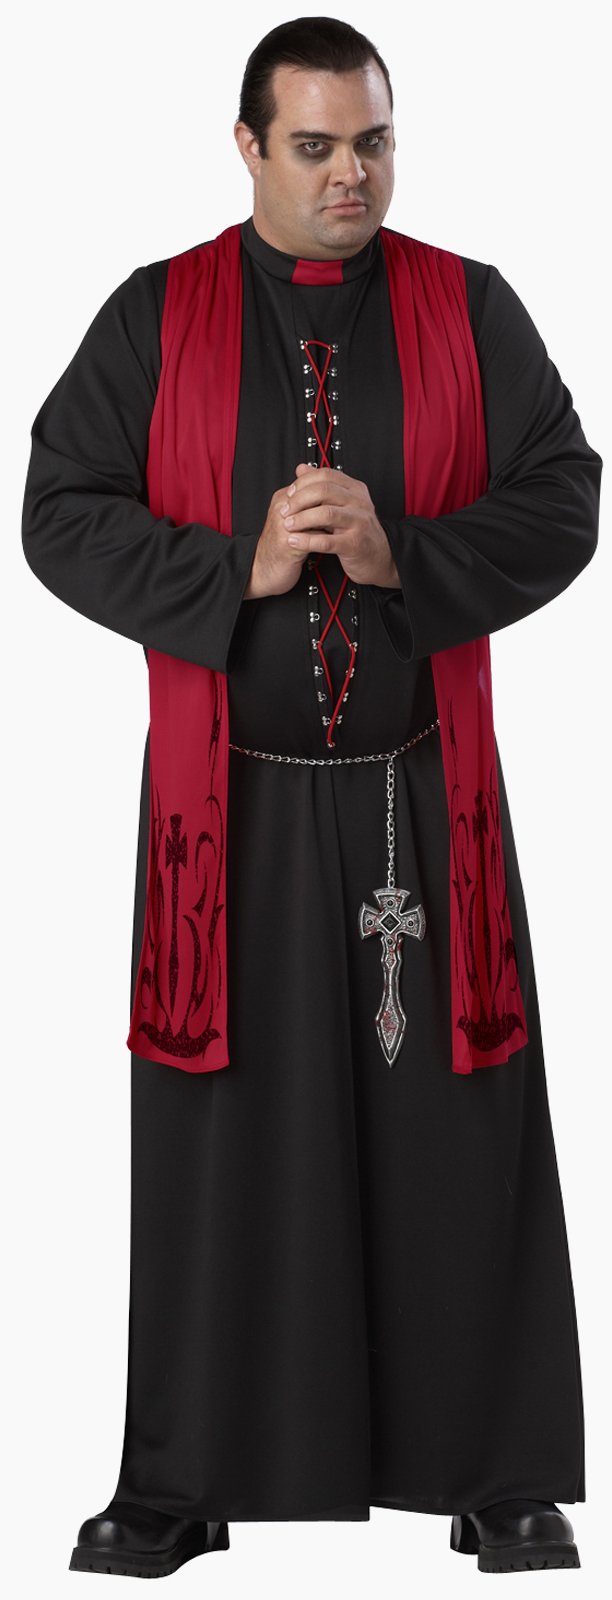 Sinister Minister Adult Plus Costume - Click Image to Close